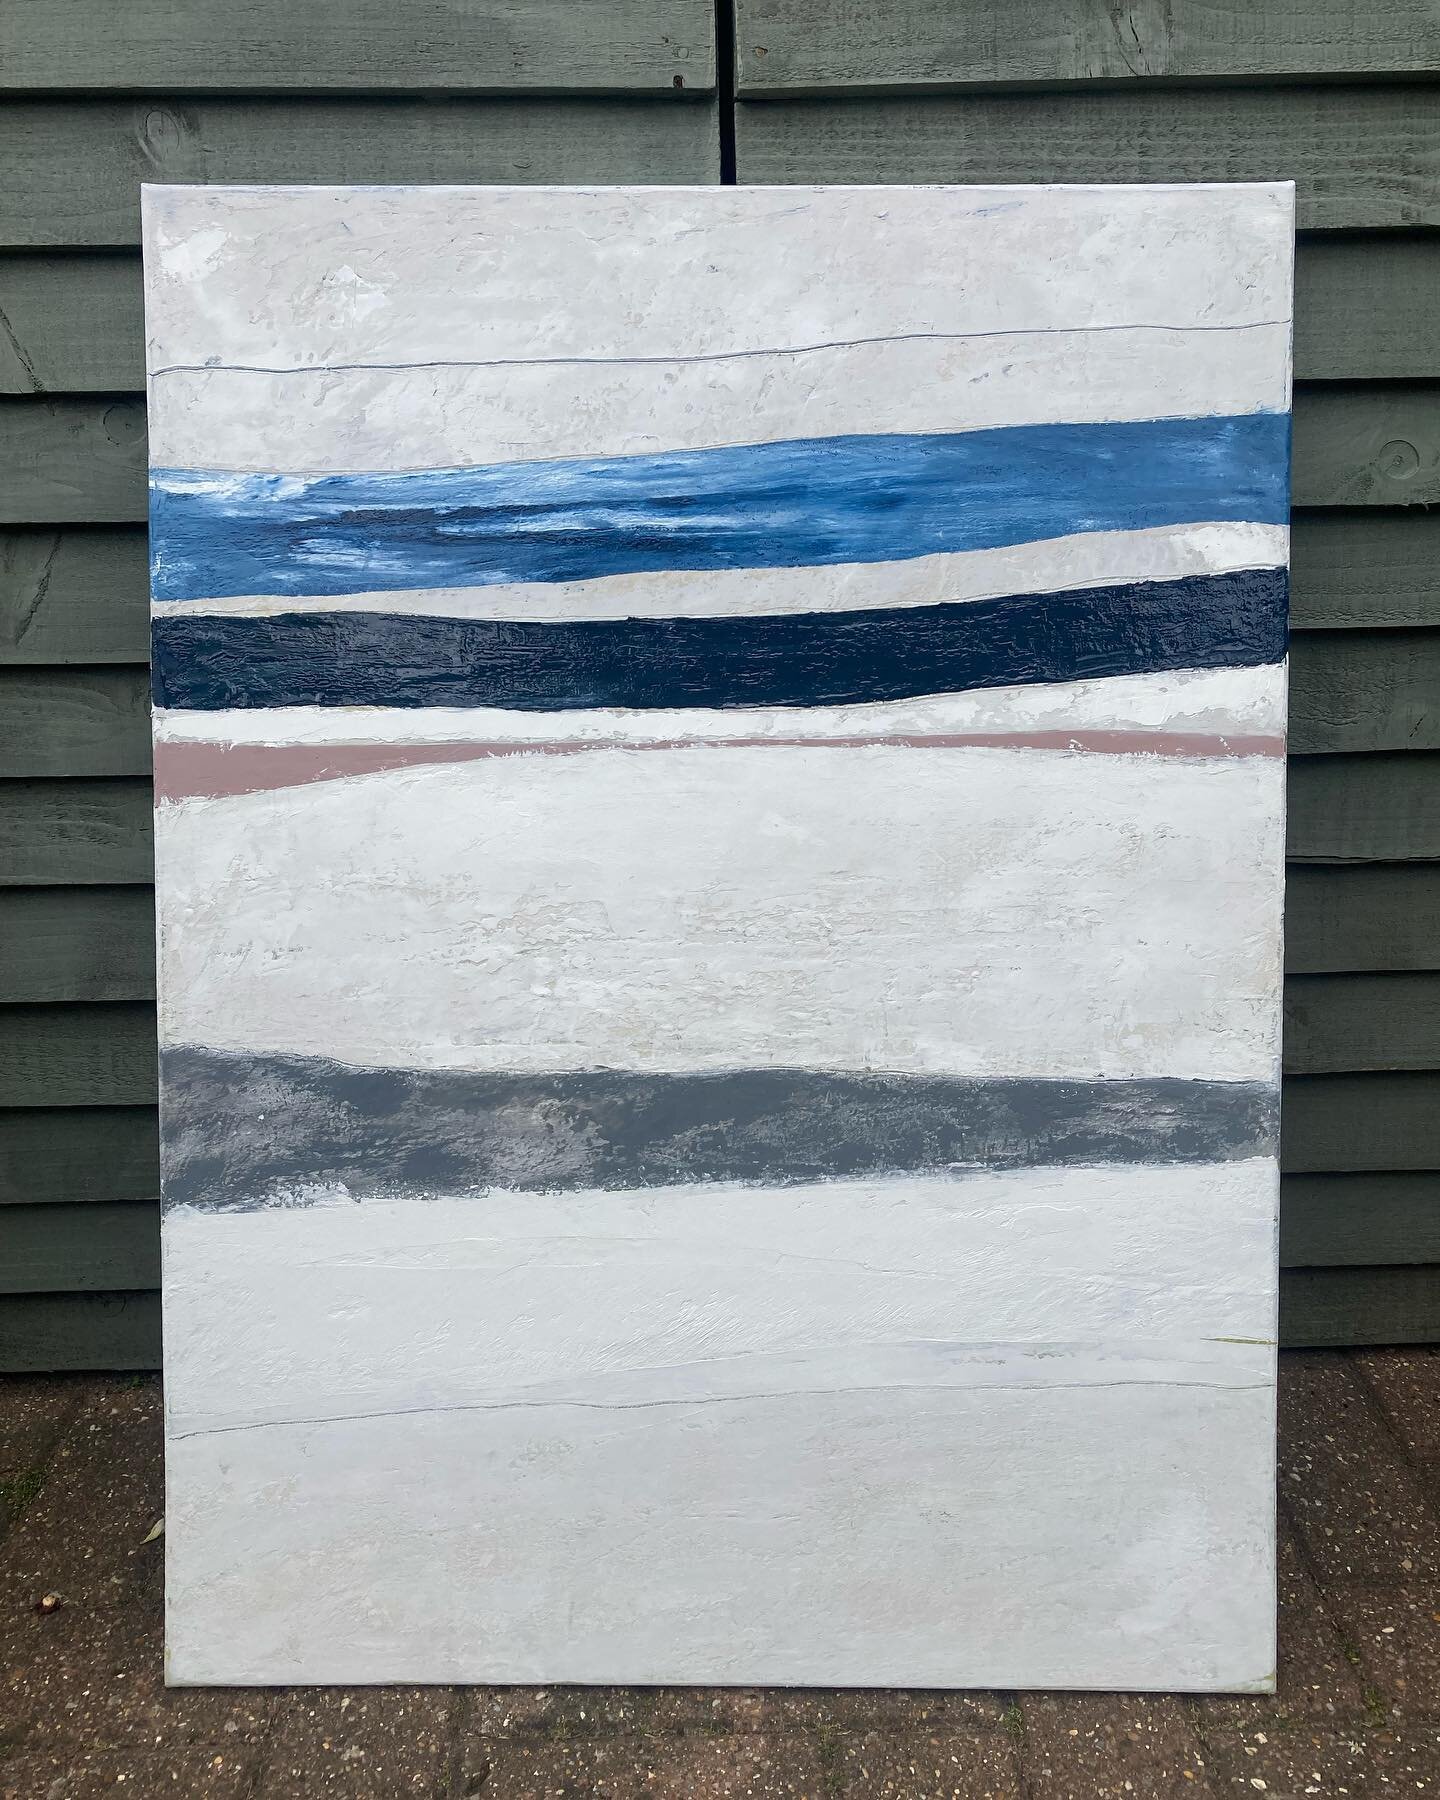 Out there
32&rdquo; x 24&rdquo; 
Oil and cold wax, mixed media on canvas 

#abstarctartist #abstractartwork #artforyourhome #artistsoninstagram #contemporaryabstractart #collectingart #artstory #artforinteriors #landscapeabstract #abstractlandscape #